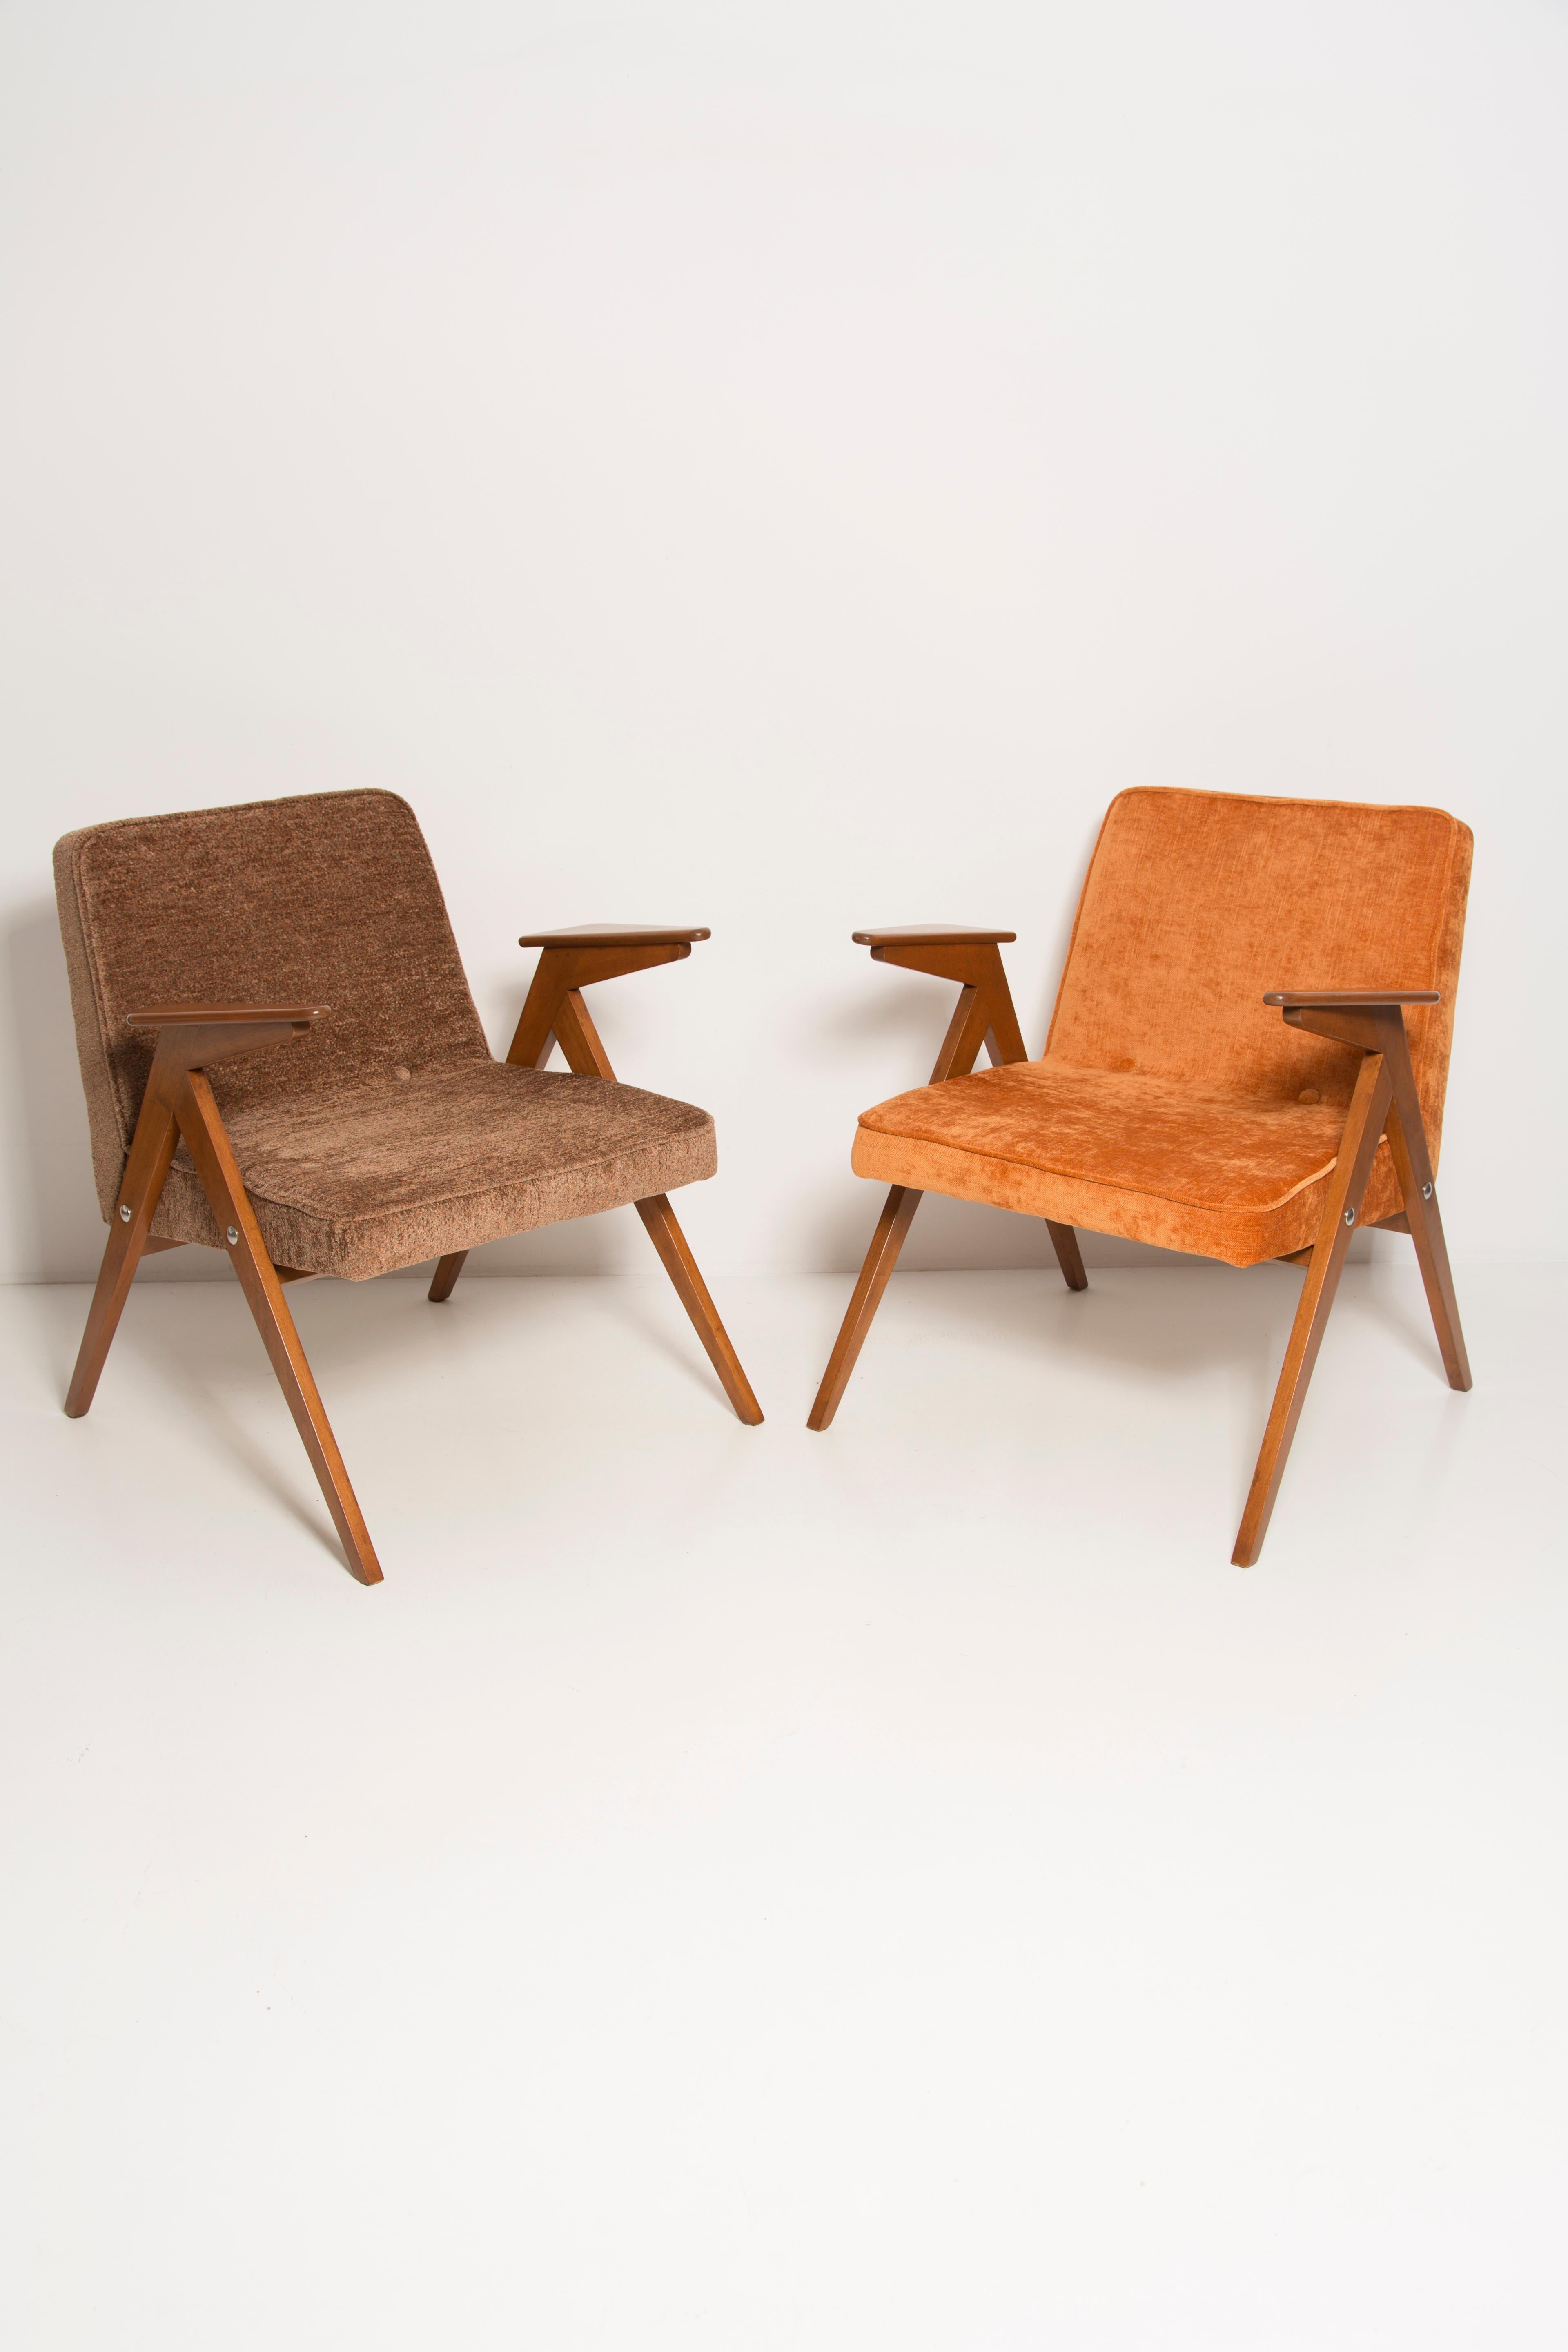 20th Century Set of Two Midcentury Bunny Armchairs by Jozef Chierowski, Poland, 1960s For Sale